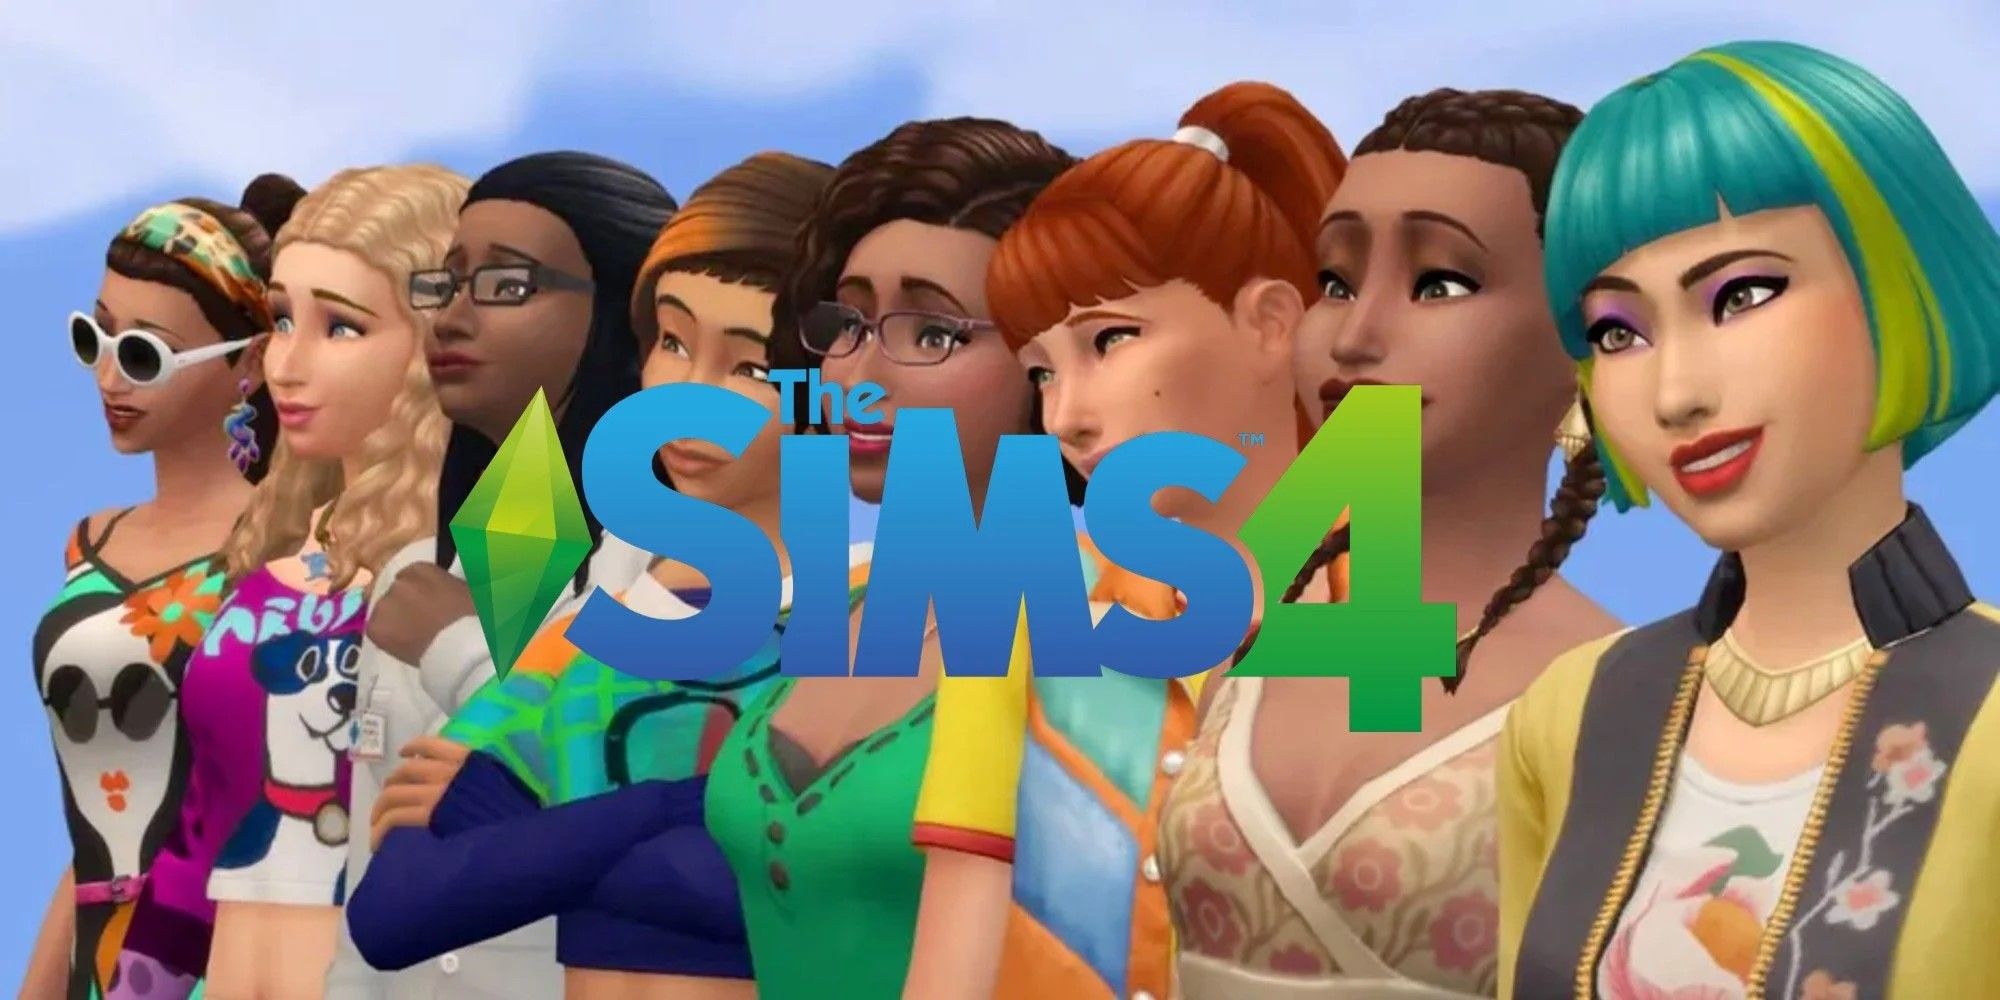 How The Sims 4’s Spring Update Broadens Representation